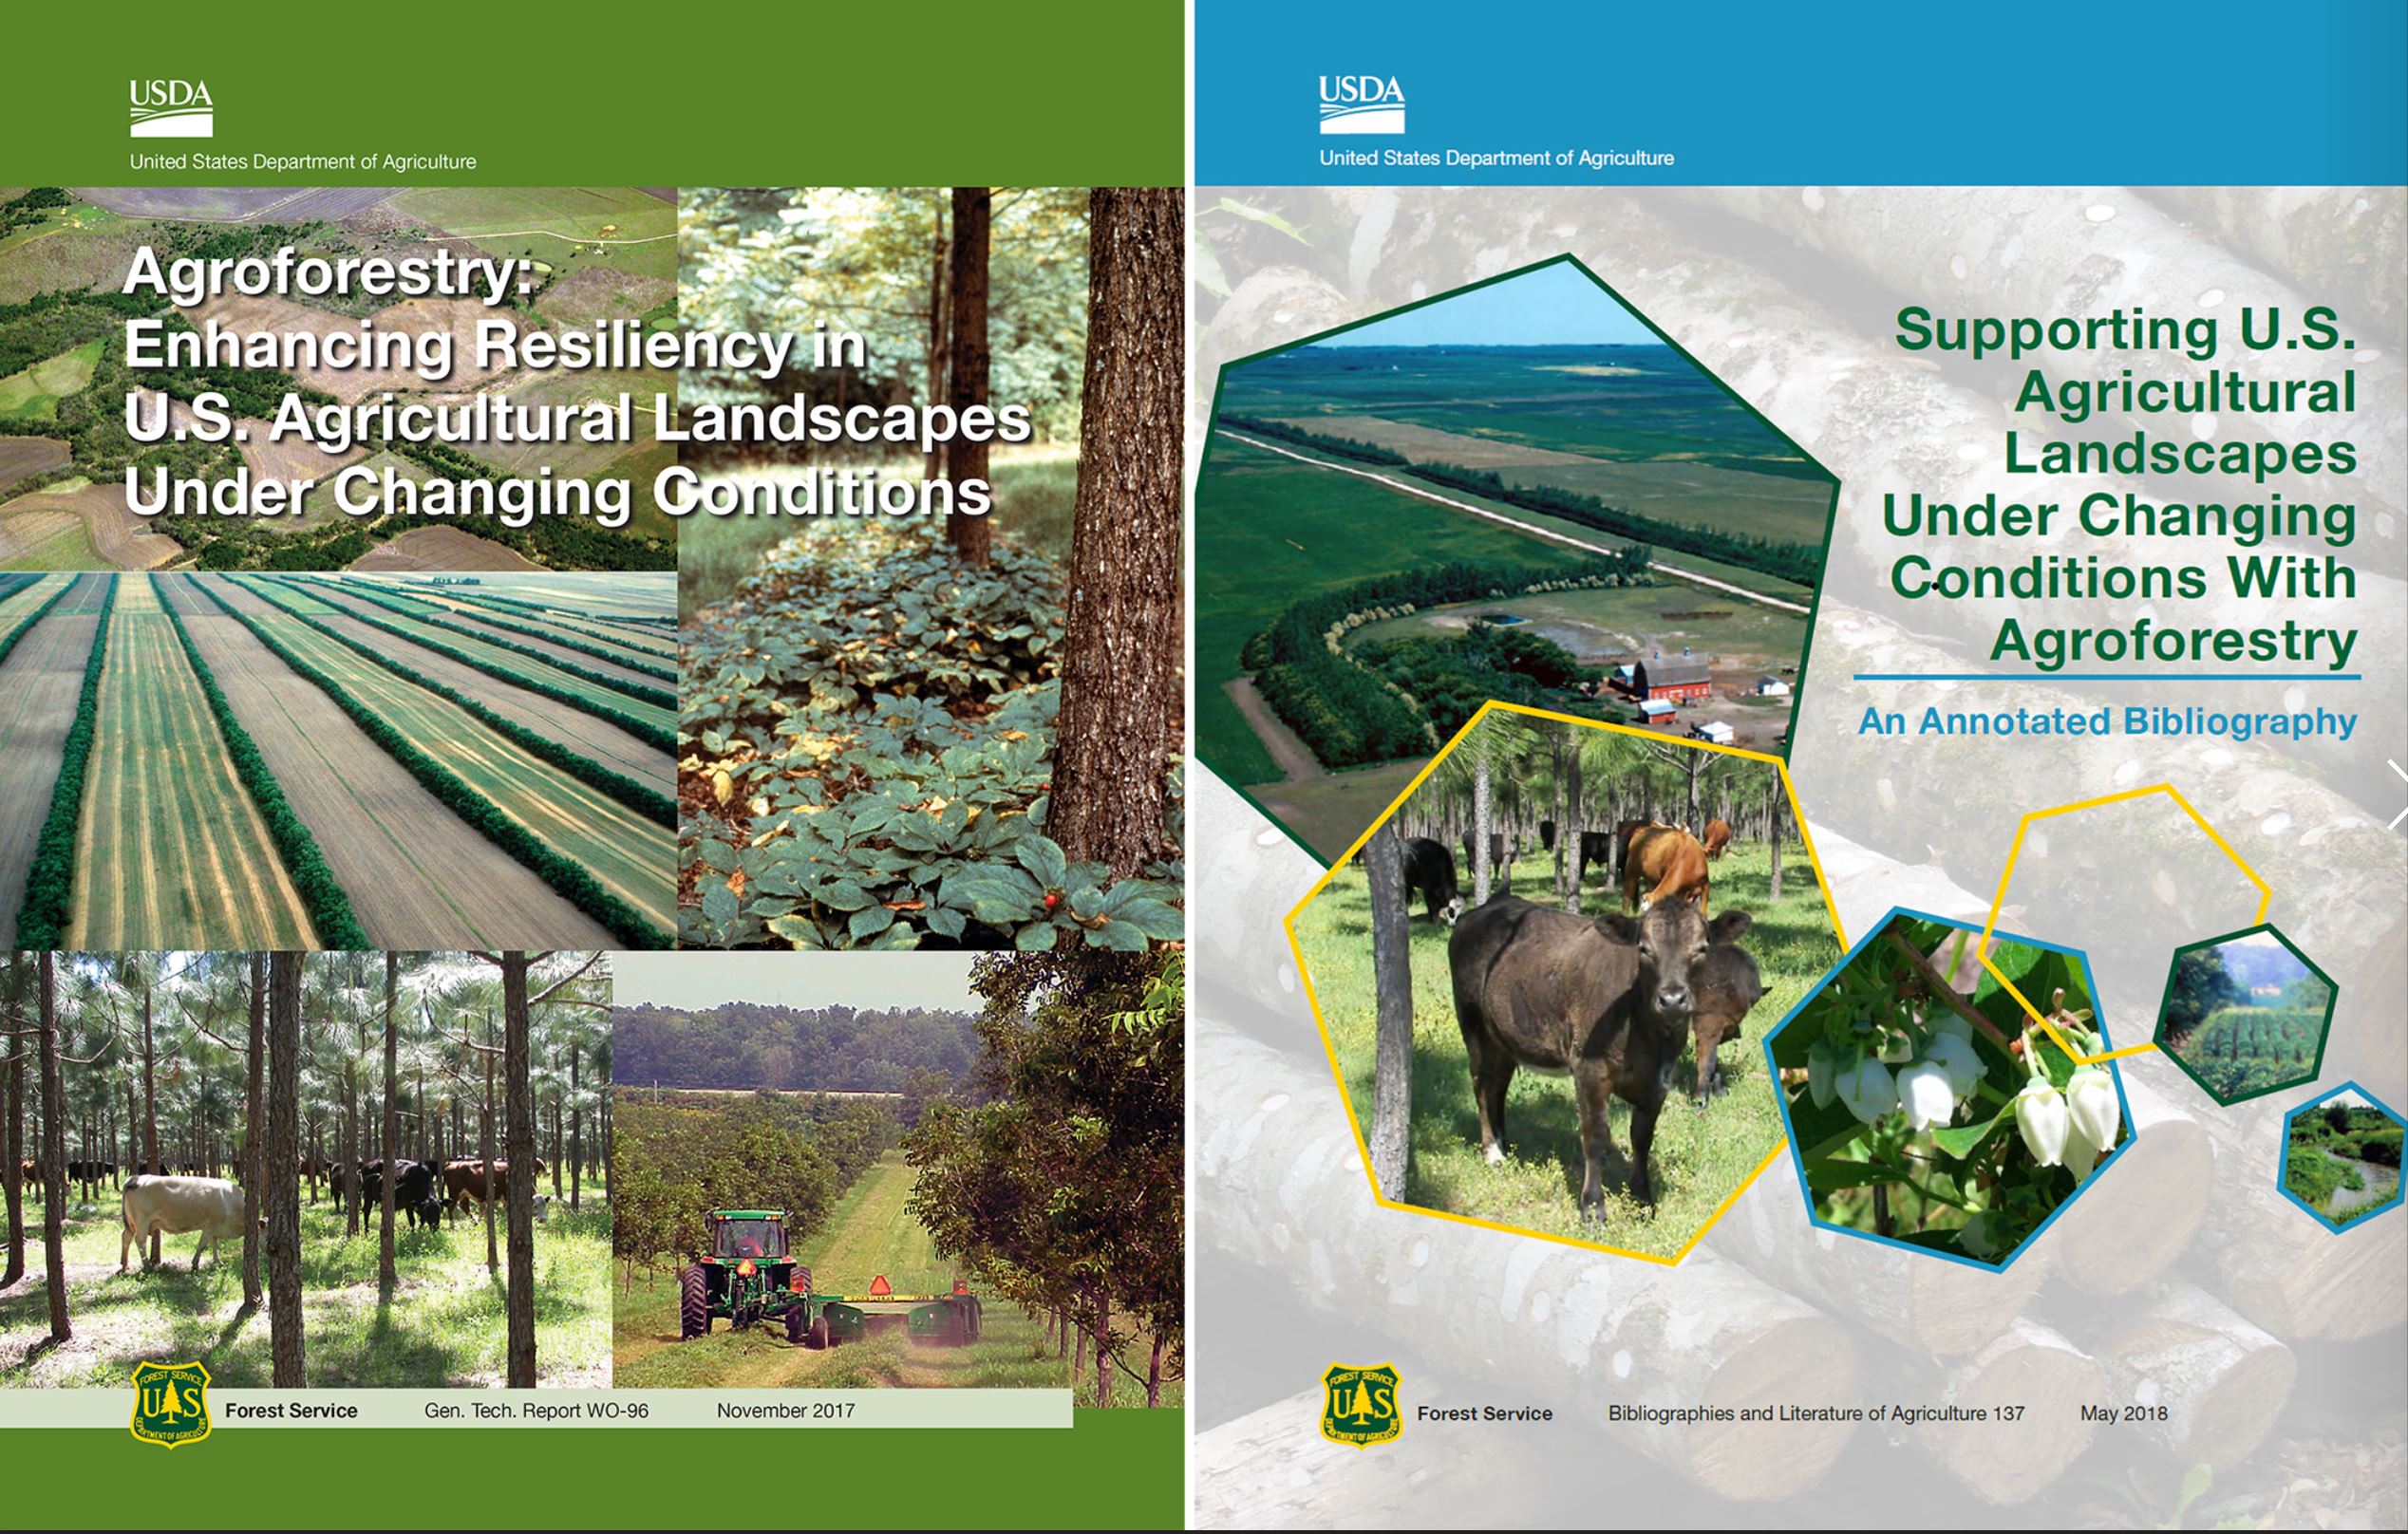 Figure 1. Title pages of the assessment report and annotated bibliography on agroforestry’s role in mitigating and adapting to climate change.